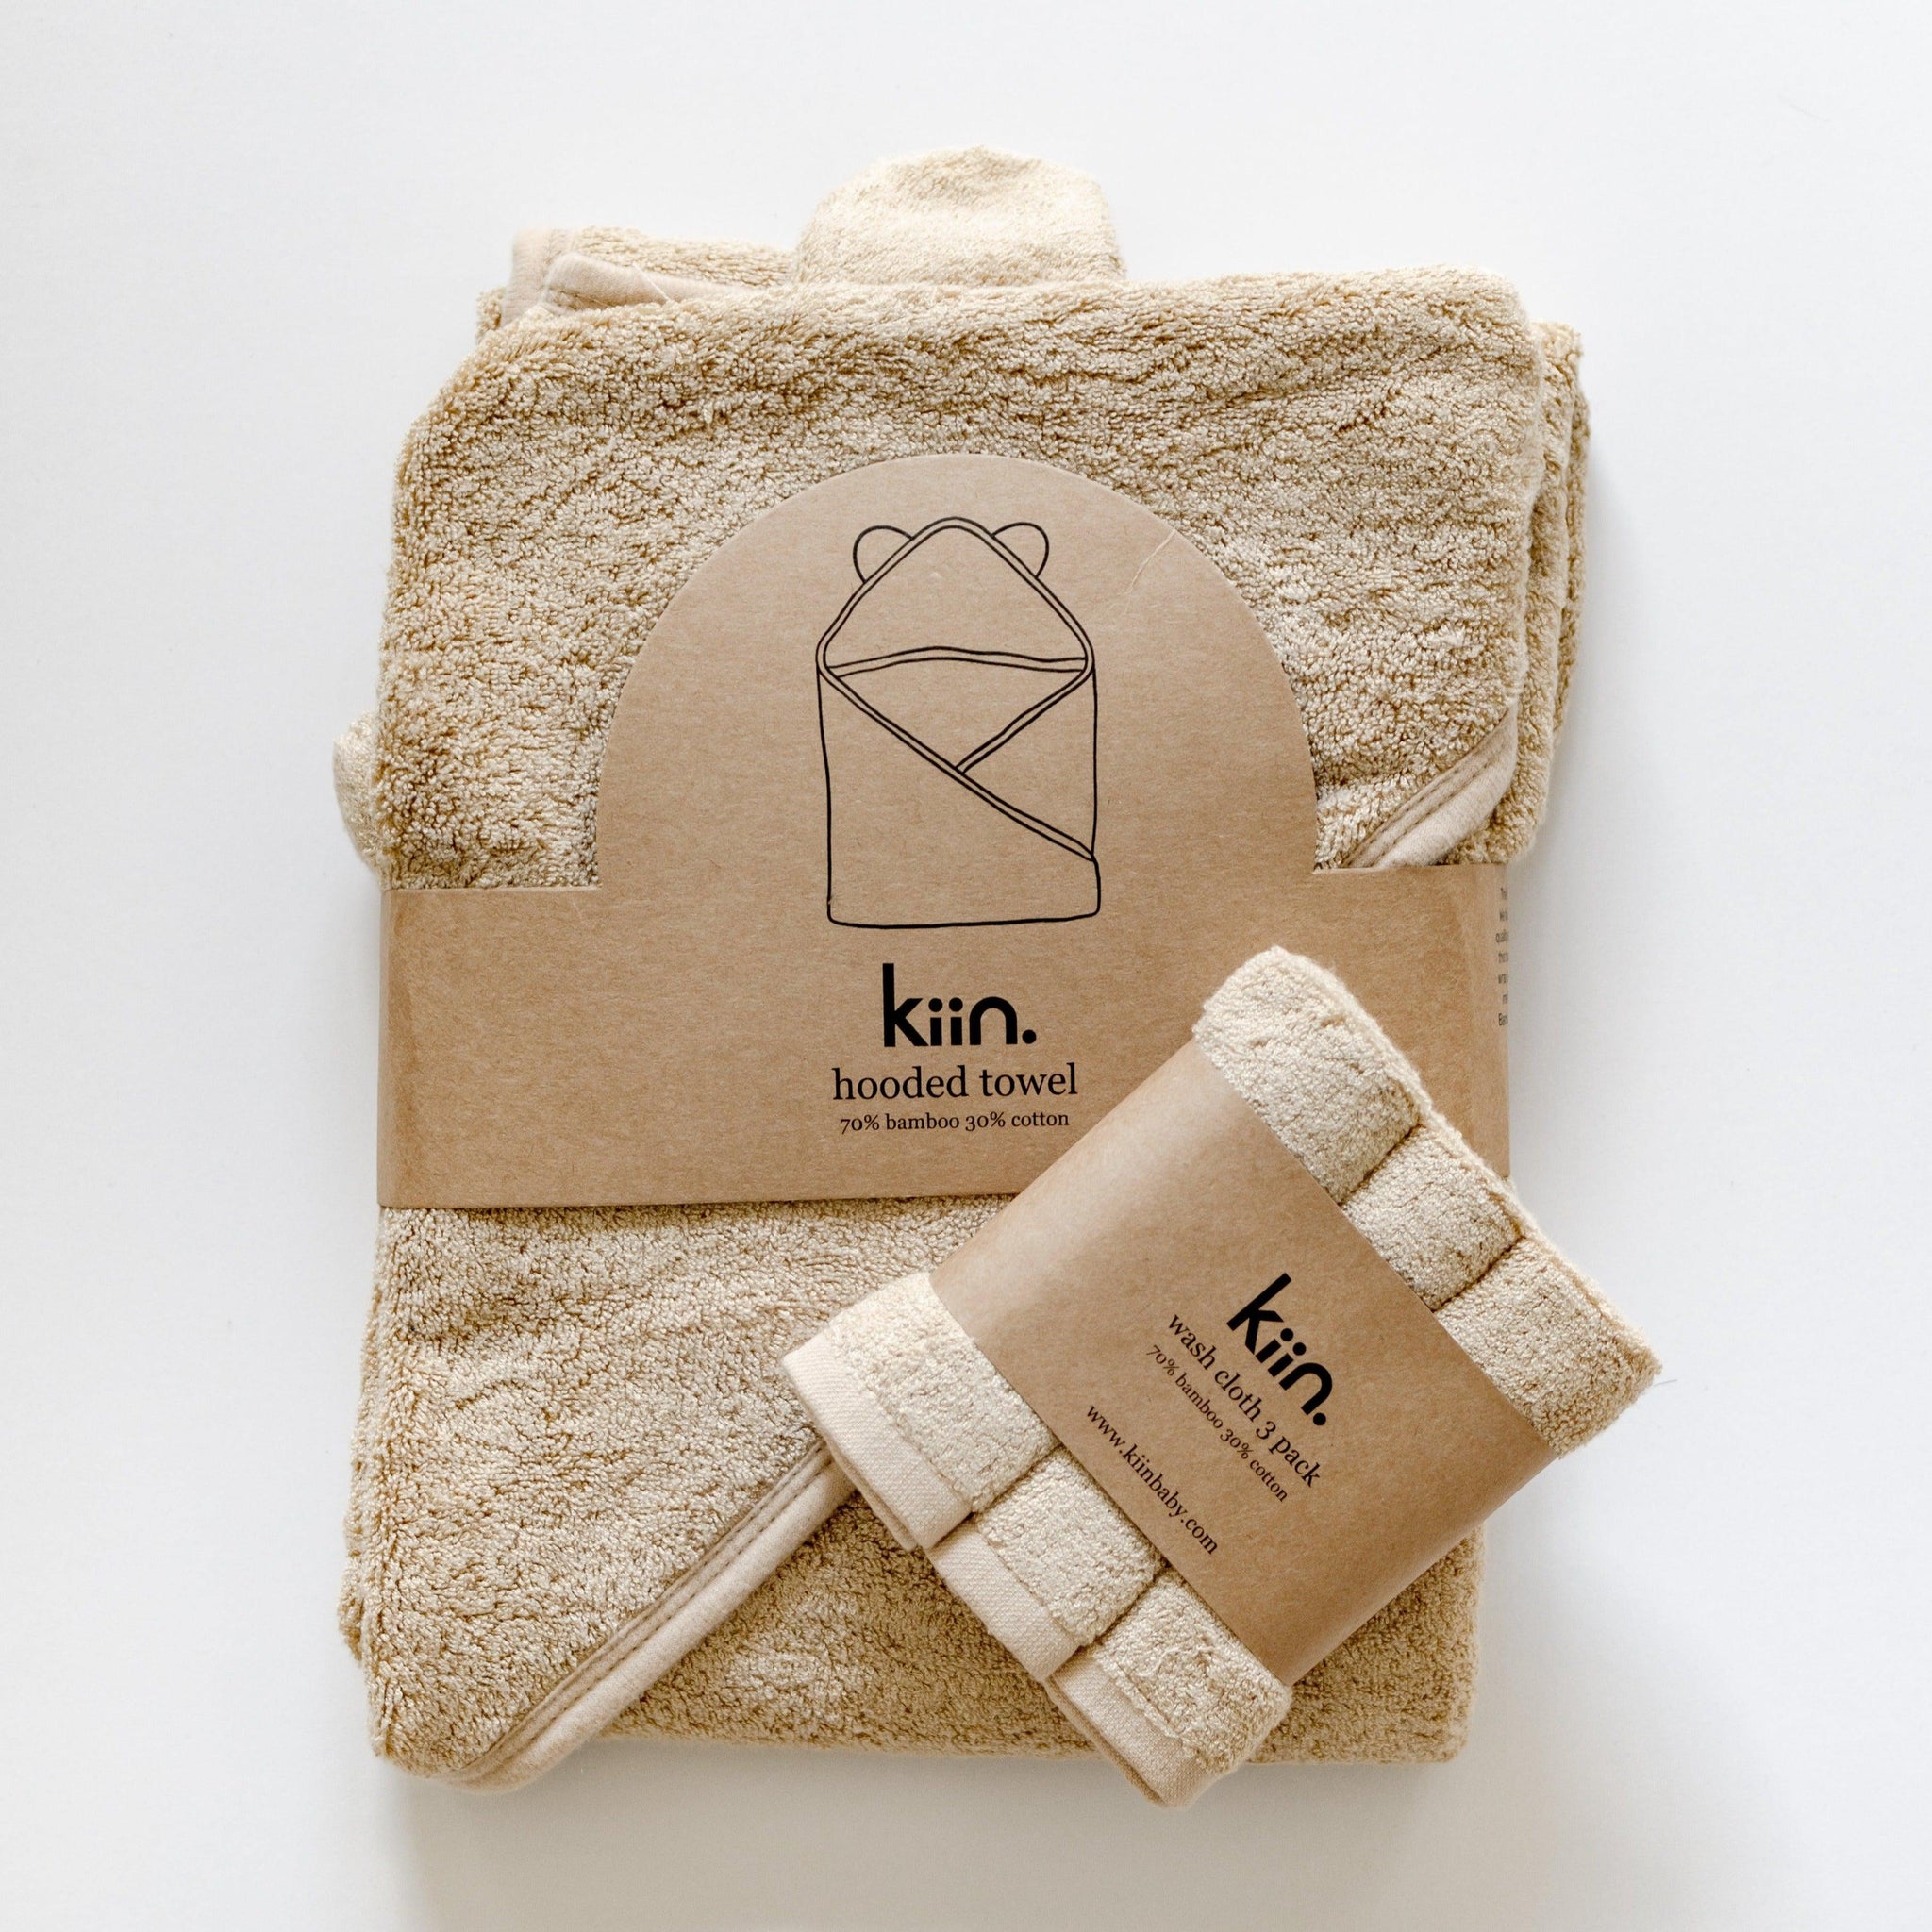 The Kiin Wash Cloth is the perfect accessory for bath & nappy change time. Designed with a hanging tab for easy hanging after use. Made in a super soft, and luxurious 500gsm cotton & bamboo blend, and measuring 25 x 25cm.